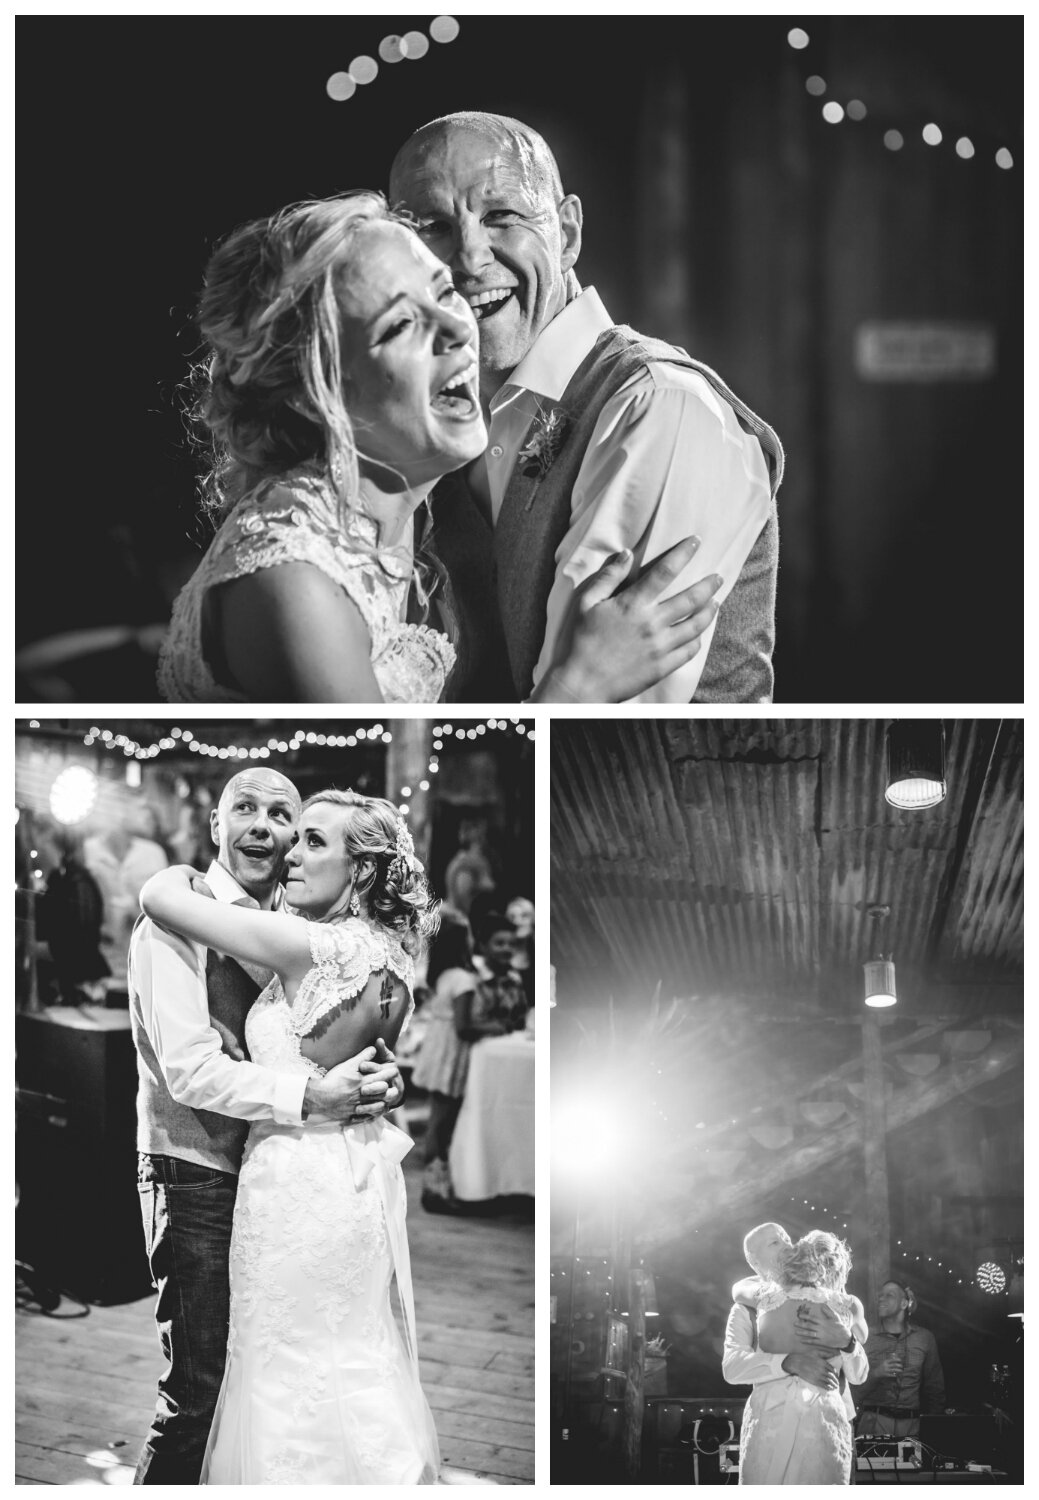  Father daughter dance.&nbsp;Wedding at The barn at Evergreen Memorial. Photographed by JMGant Photography. 